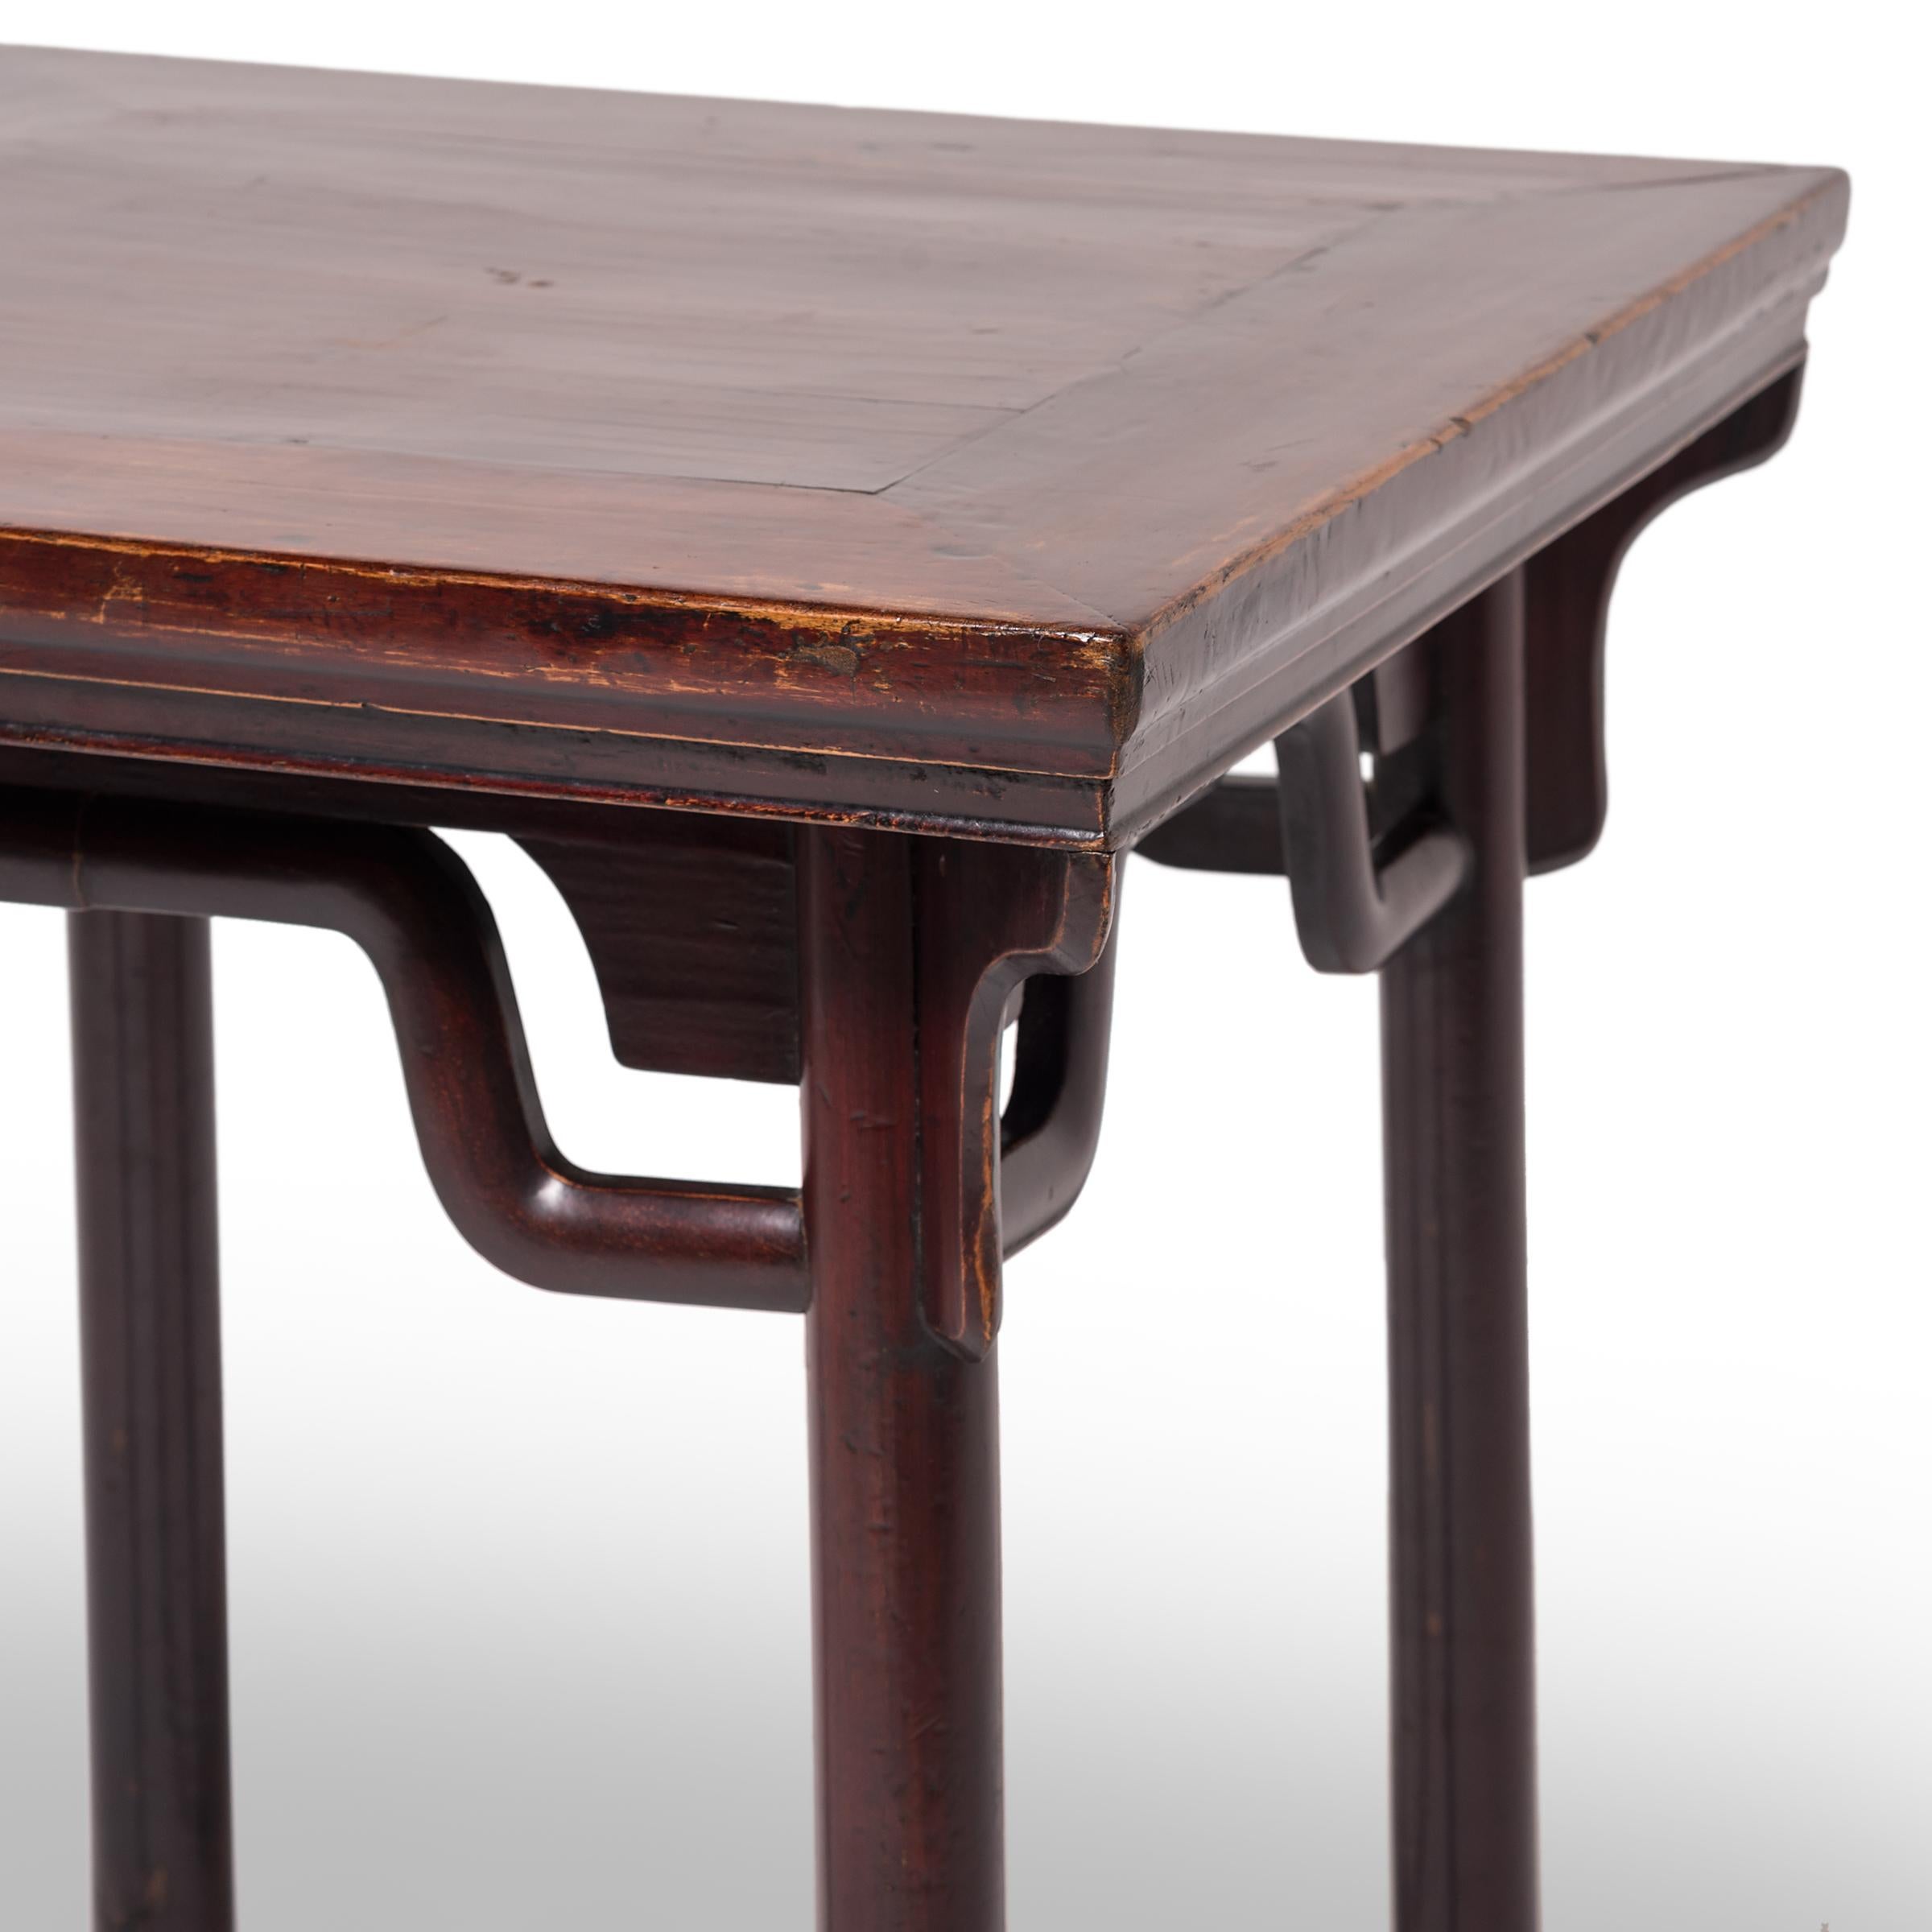 Elm 19th Century Chinese Square Table with Humpback Stretchers